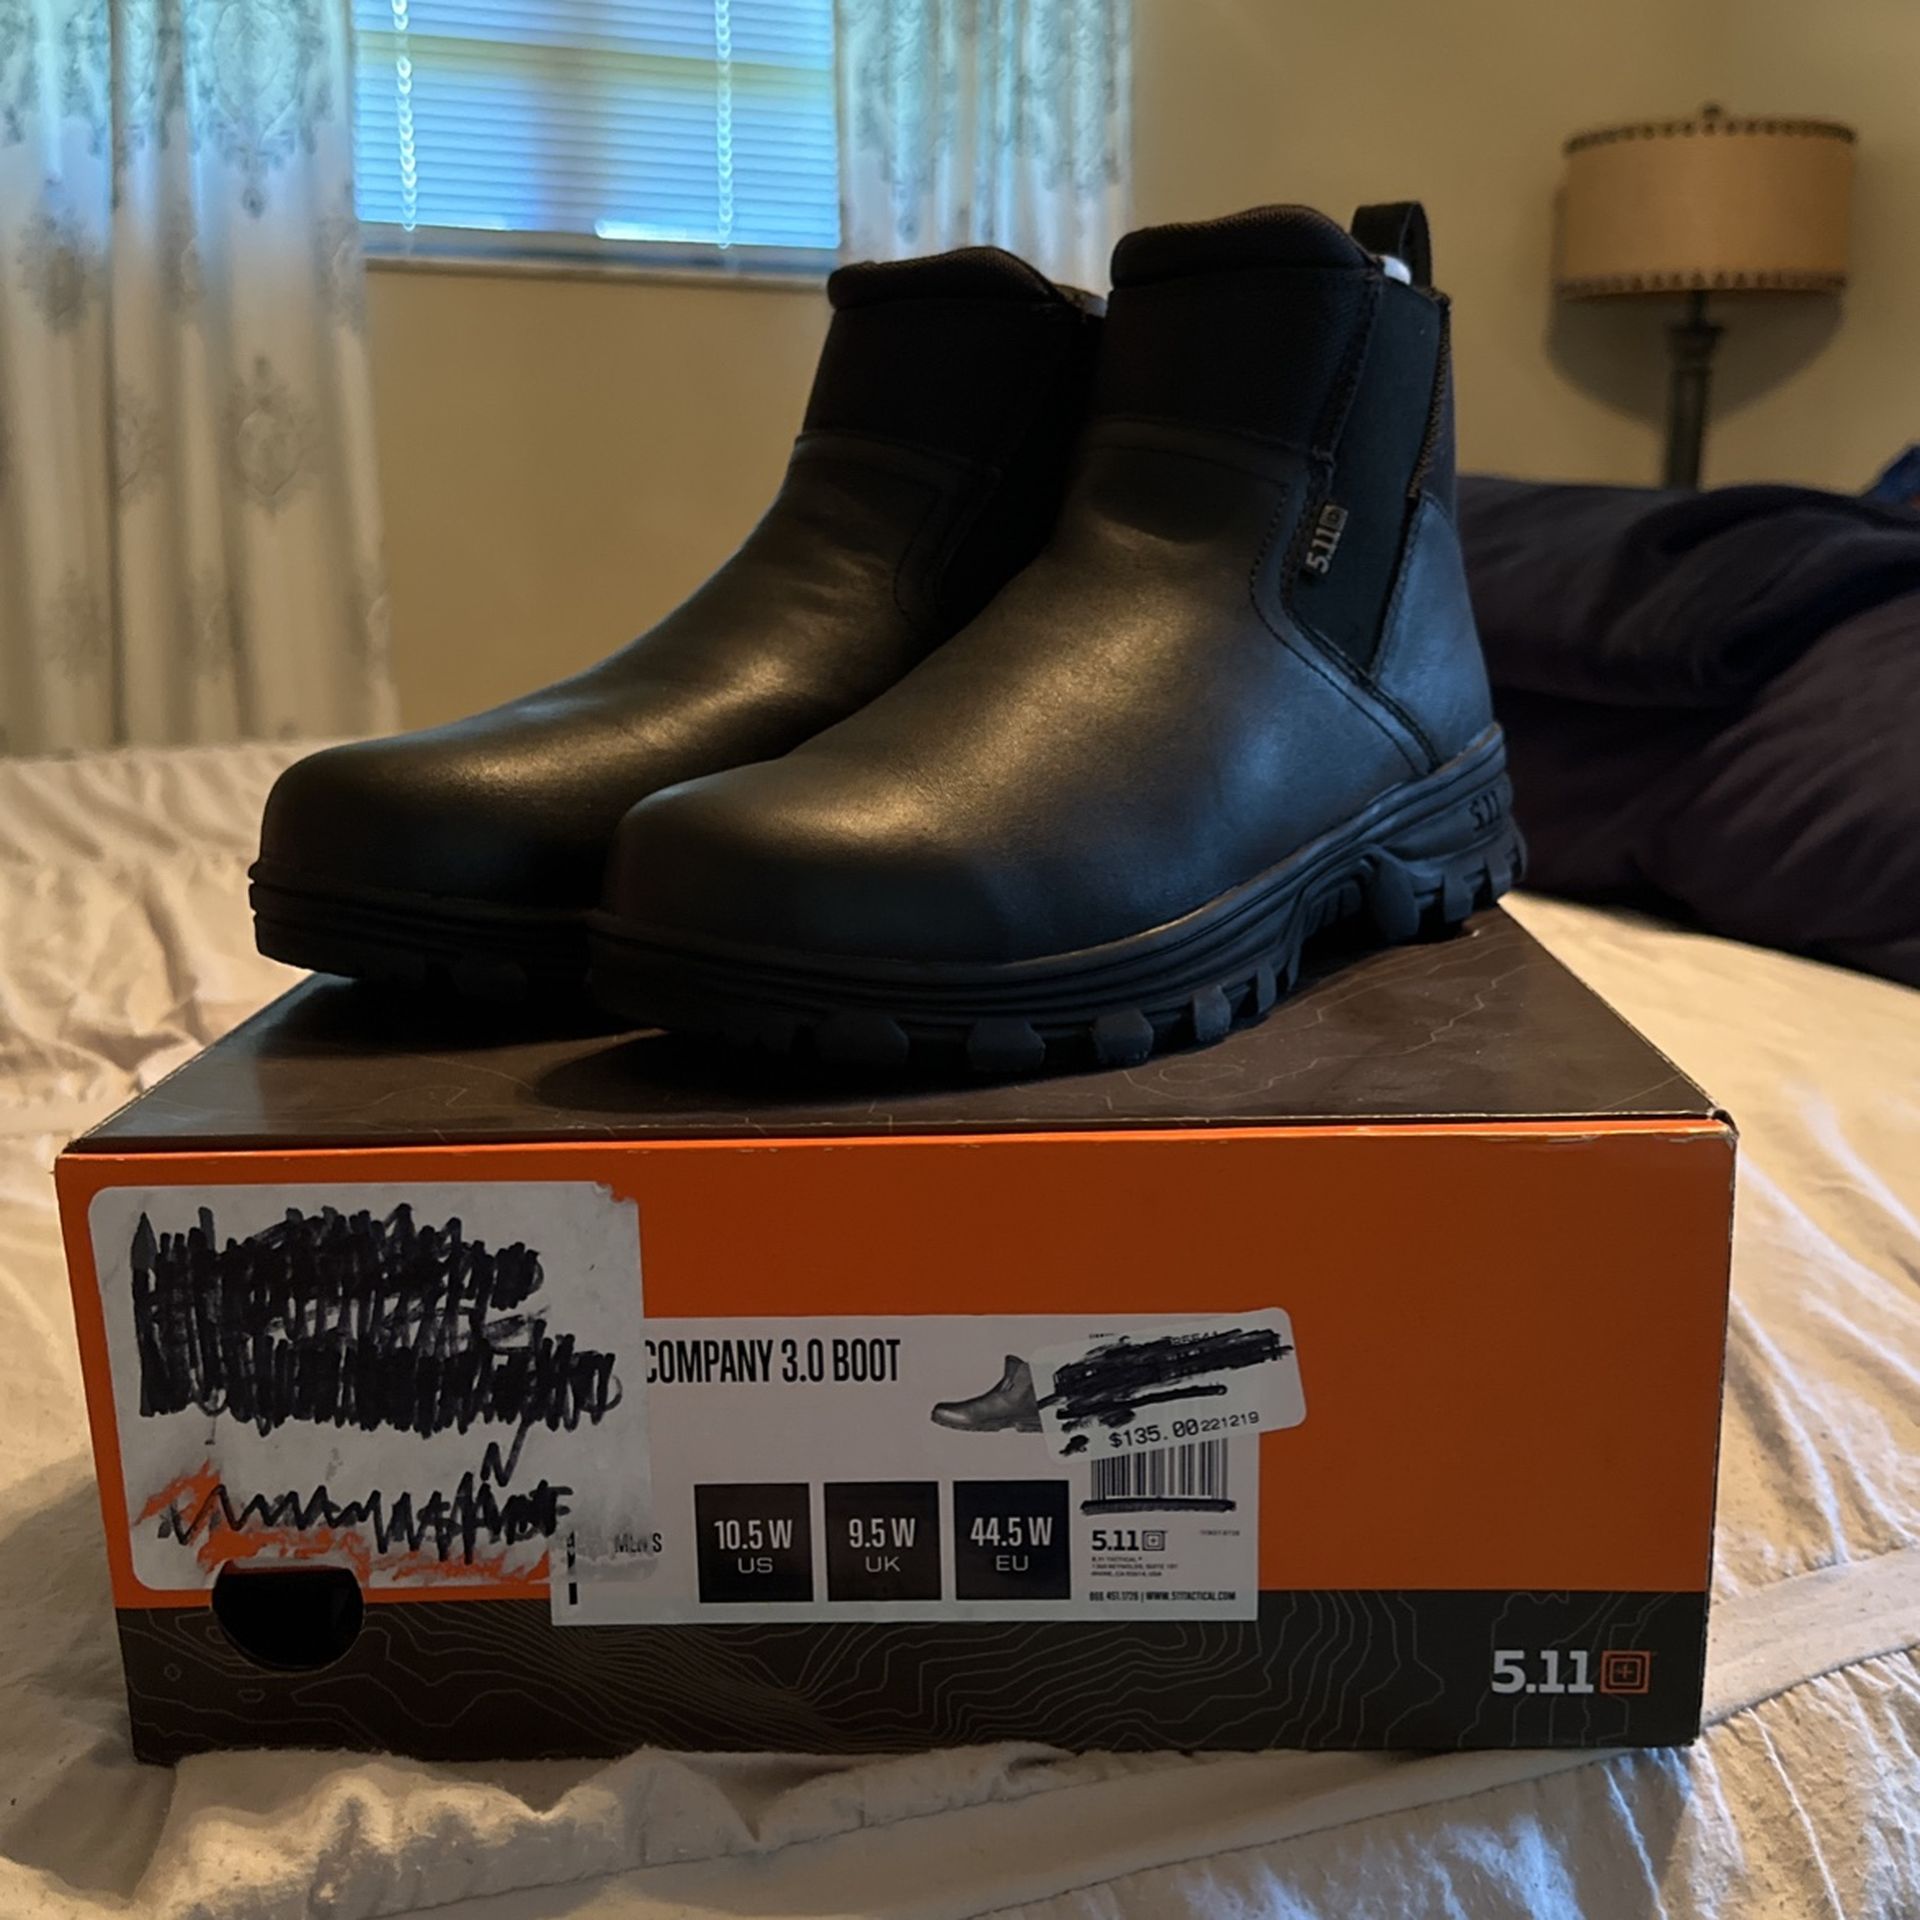 New 5.11 Work Boots Size 10.5 W